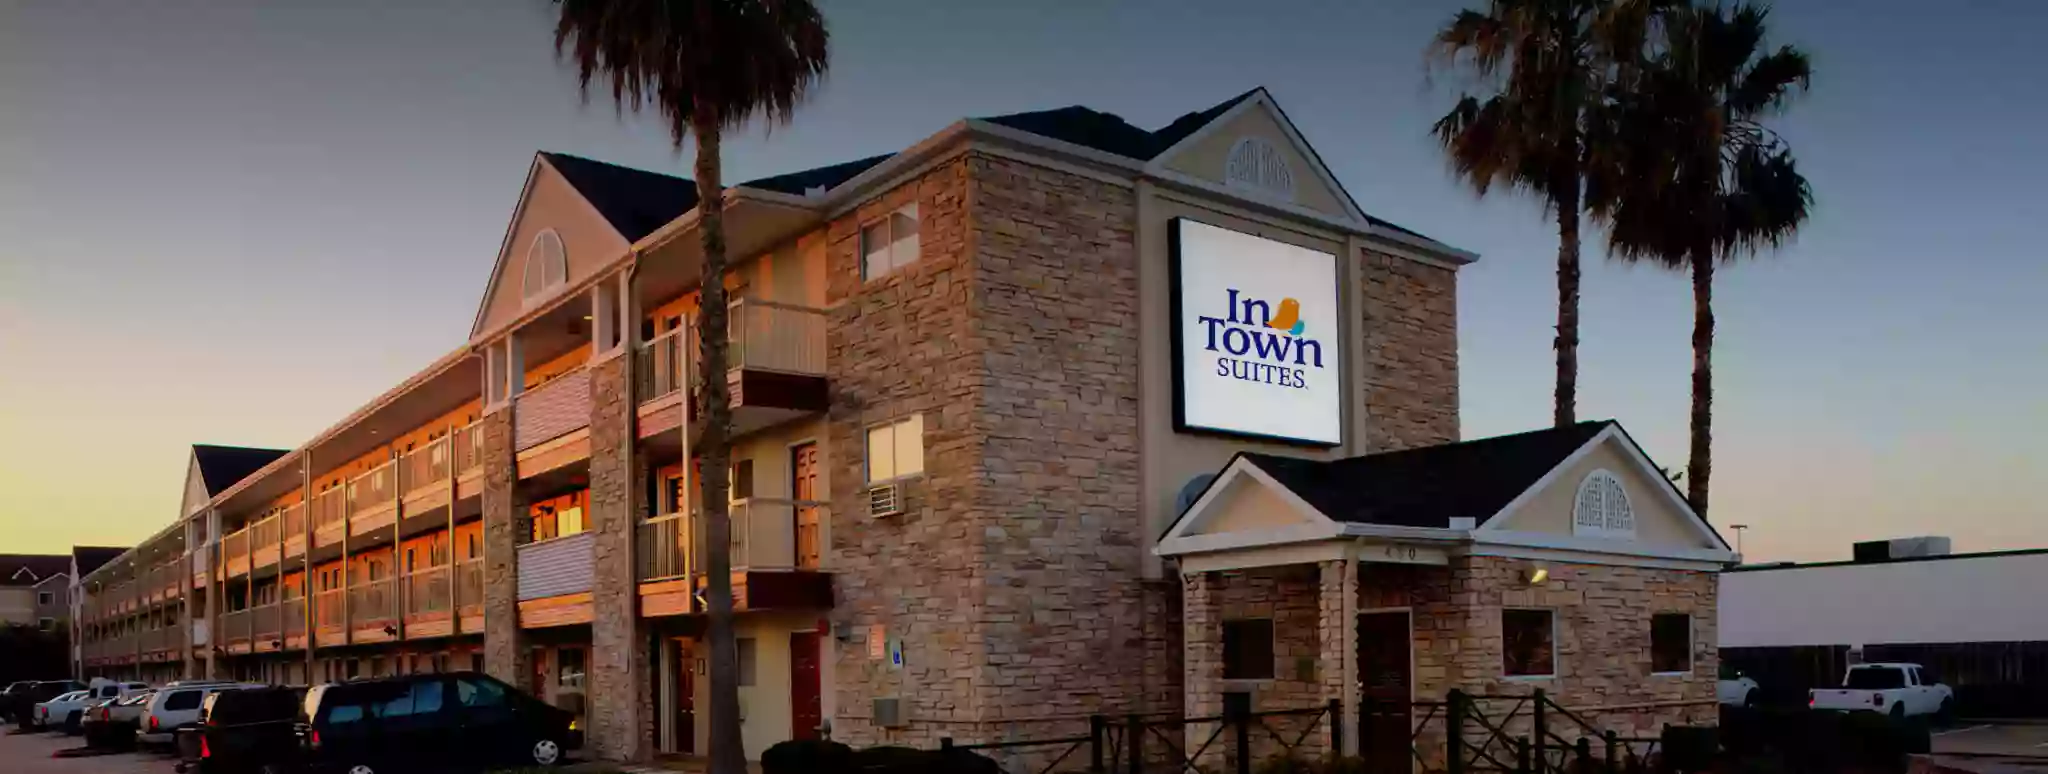 InTown Suites Extended Stay North Charleston SC - Rivers Ave